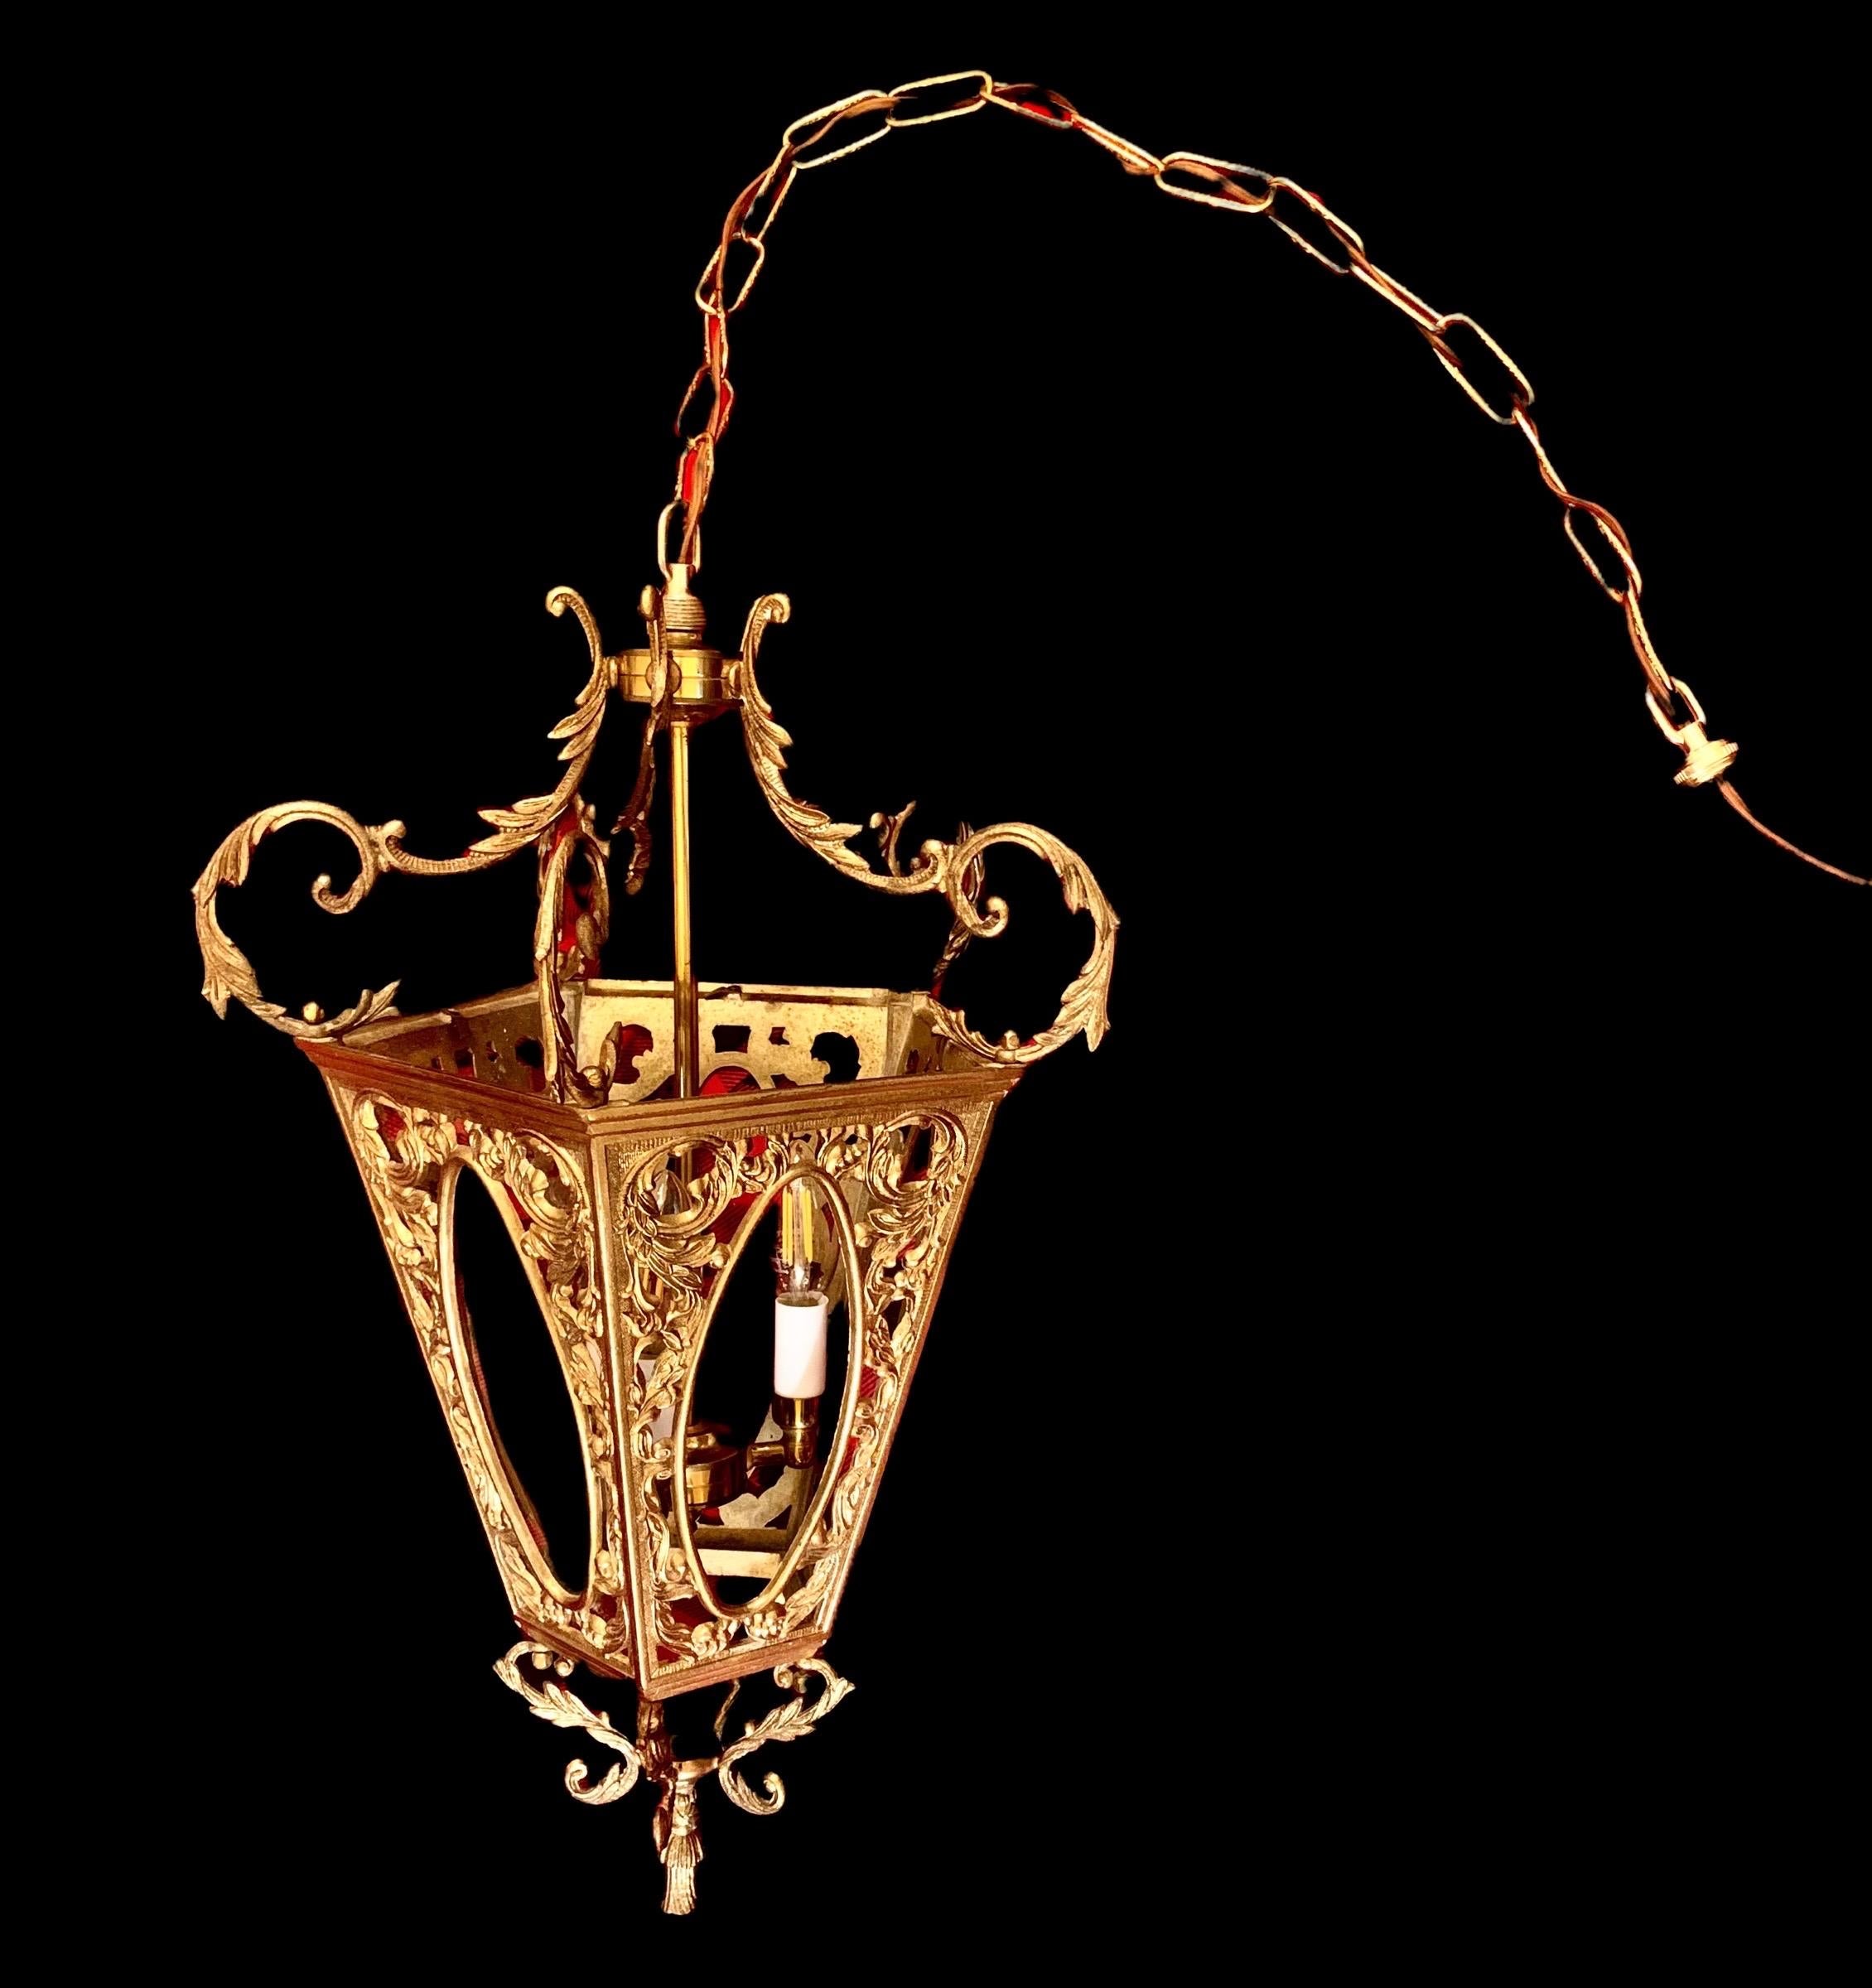 Antique Early 20th C. Gilt Brass & Glass Pentagonal Hall Lantern In Good Condition For Sale In New Orleans, LA